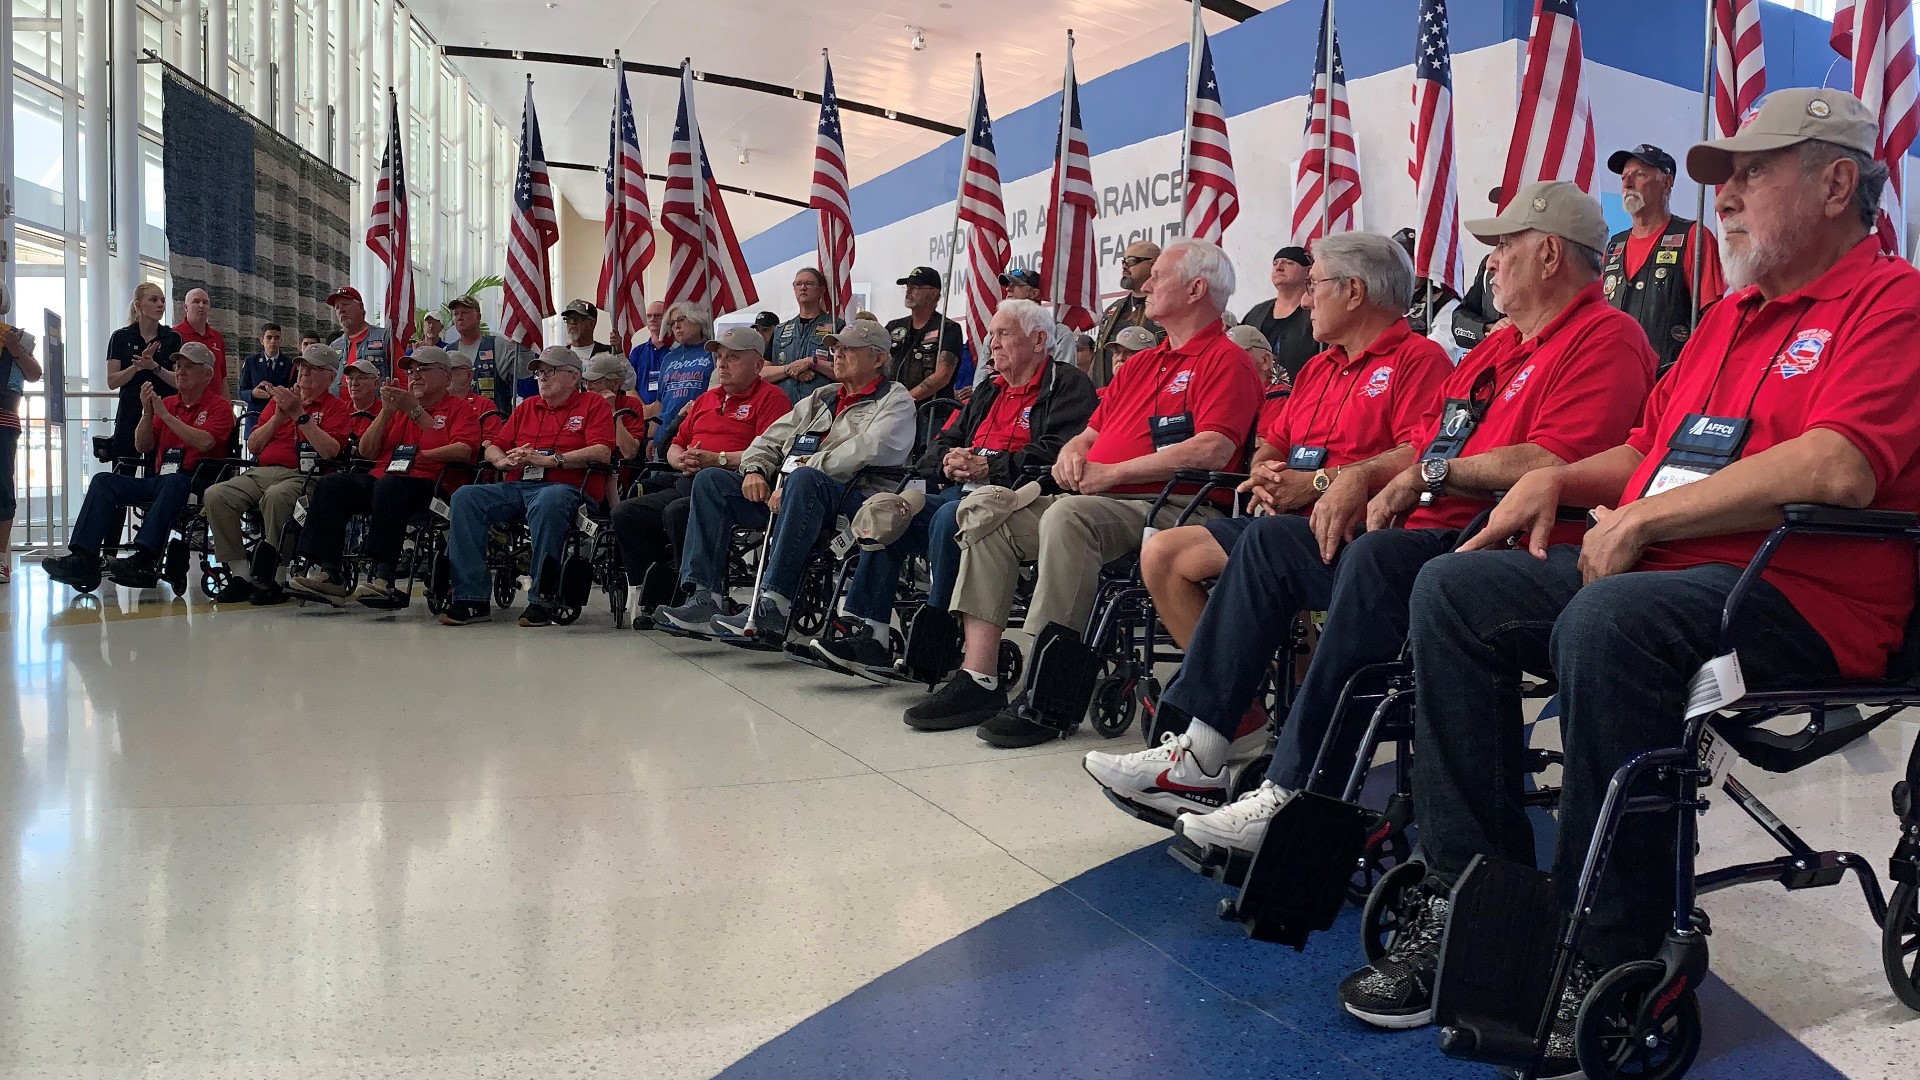 Veterans from the Korean War, Vietnam War, and one veteran from World War II arrived to a warm welcome the San Antonio International Airport.